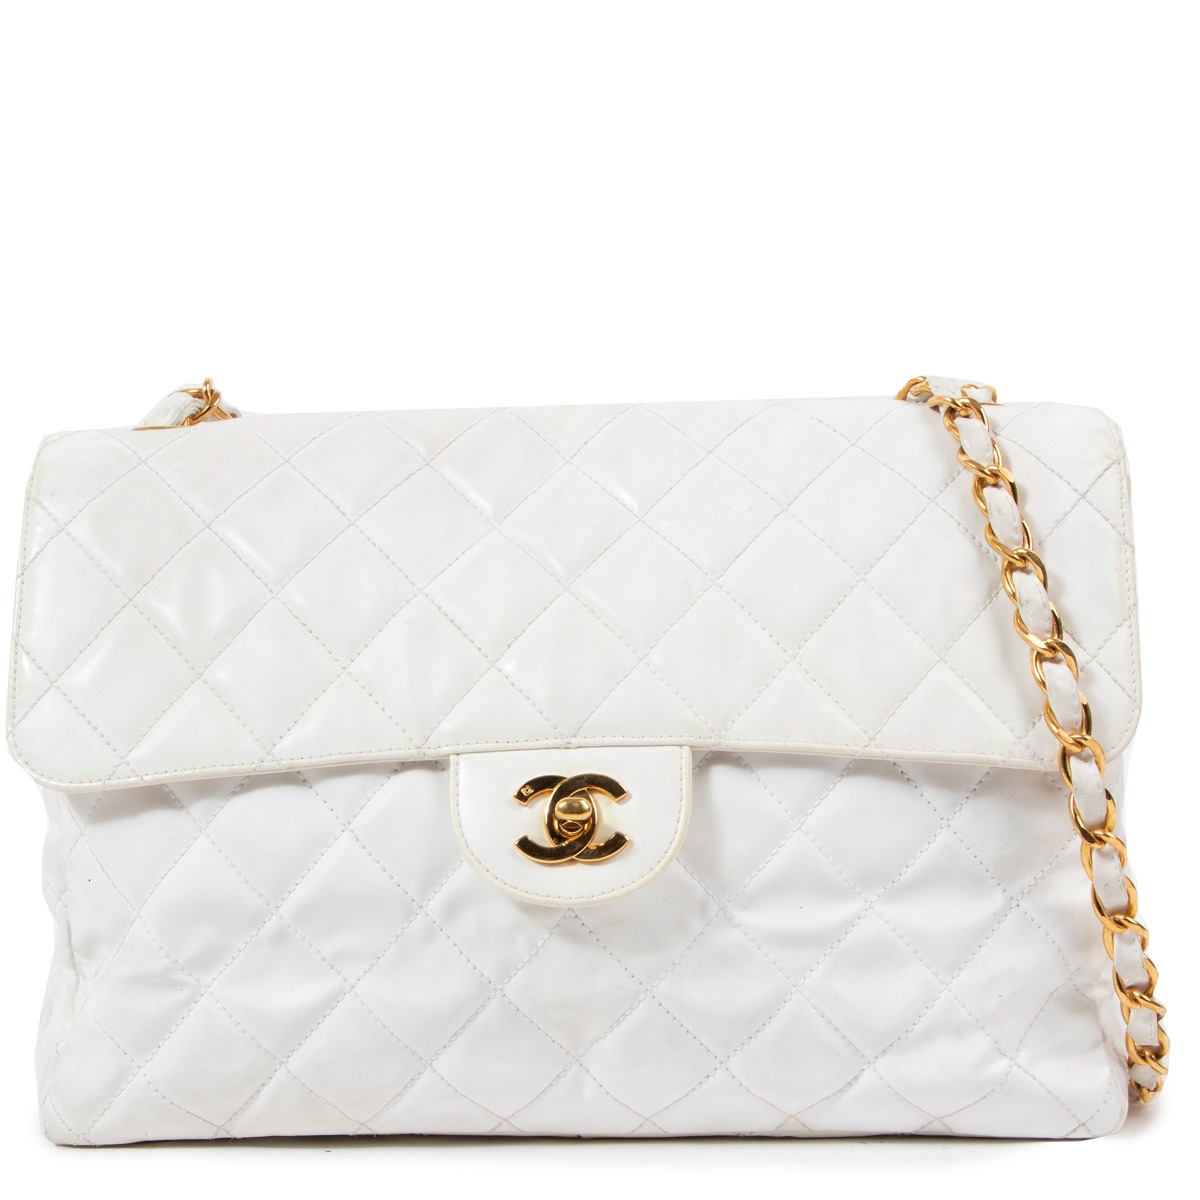 White Chanel Bag Stock Photo  Download Image Now  Chanel  Designer  Label Bag Gold Colored  iStock